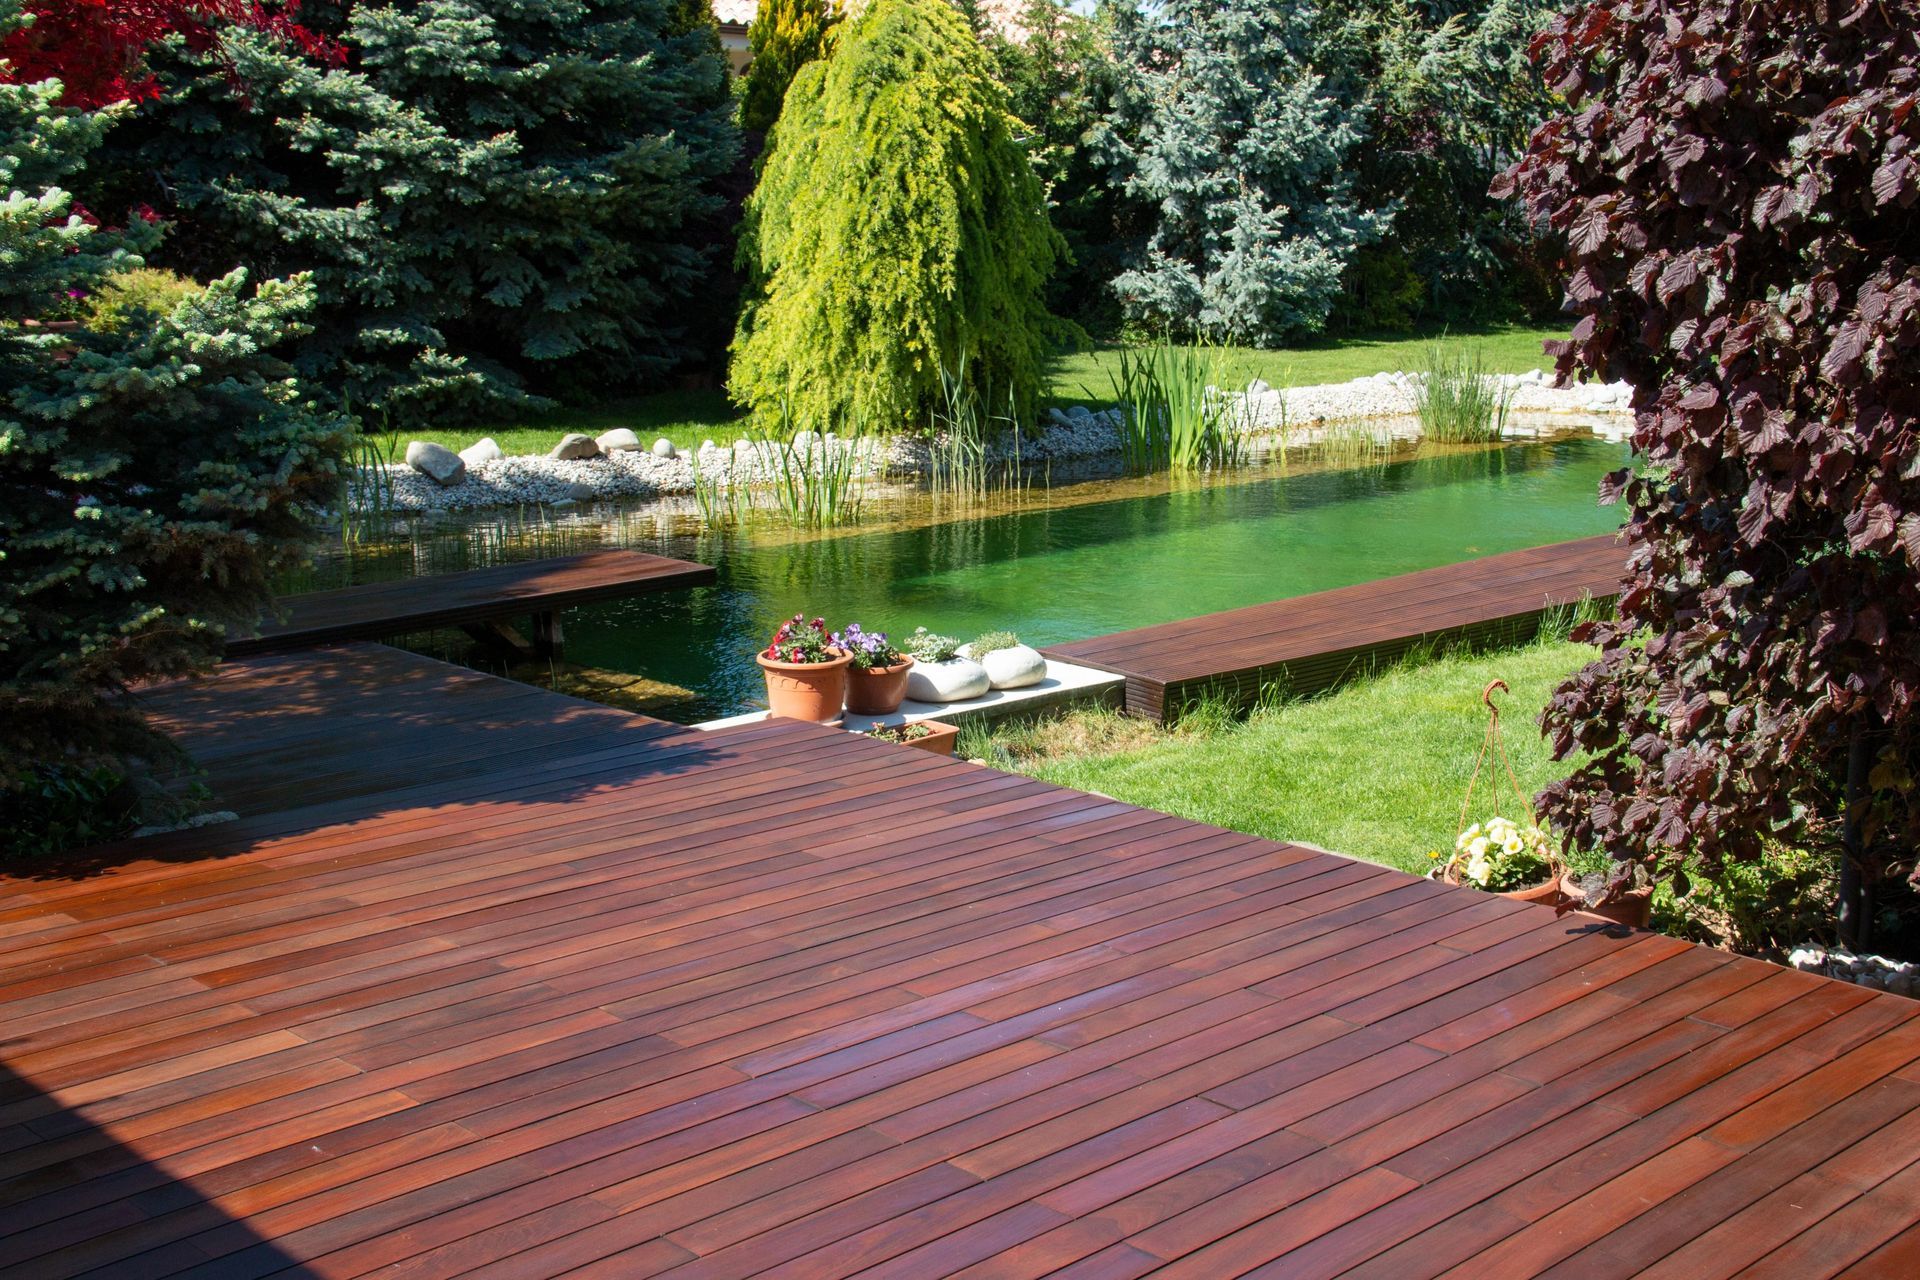 A wooden deck with a pond in the background